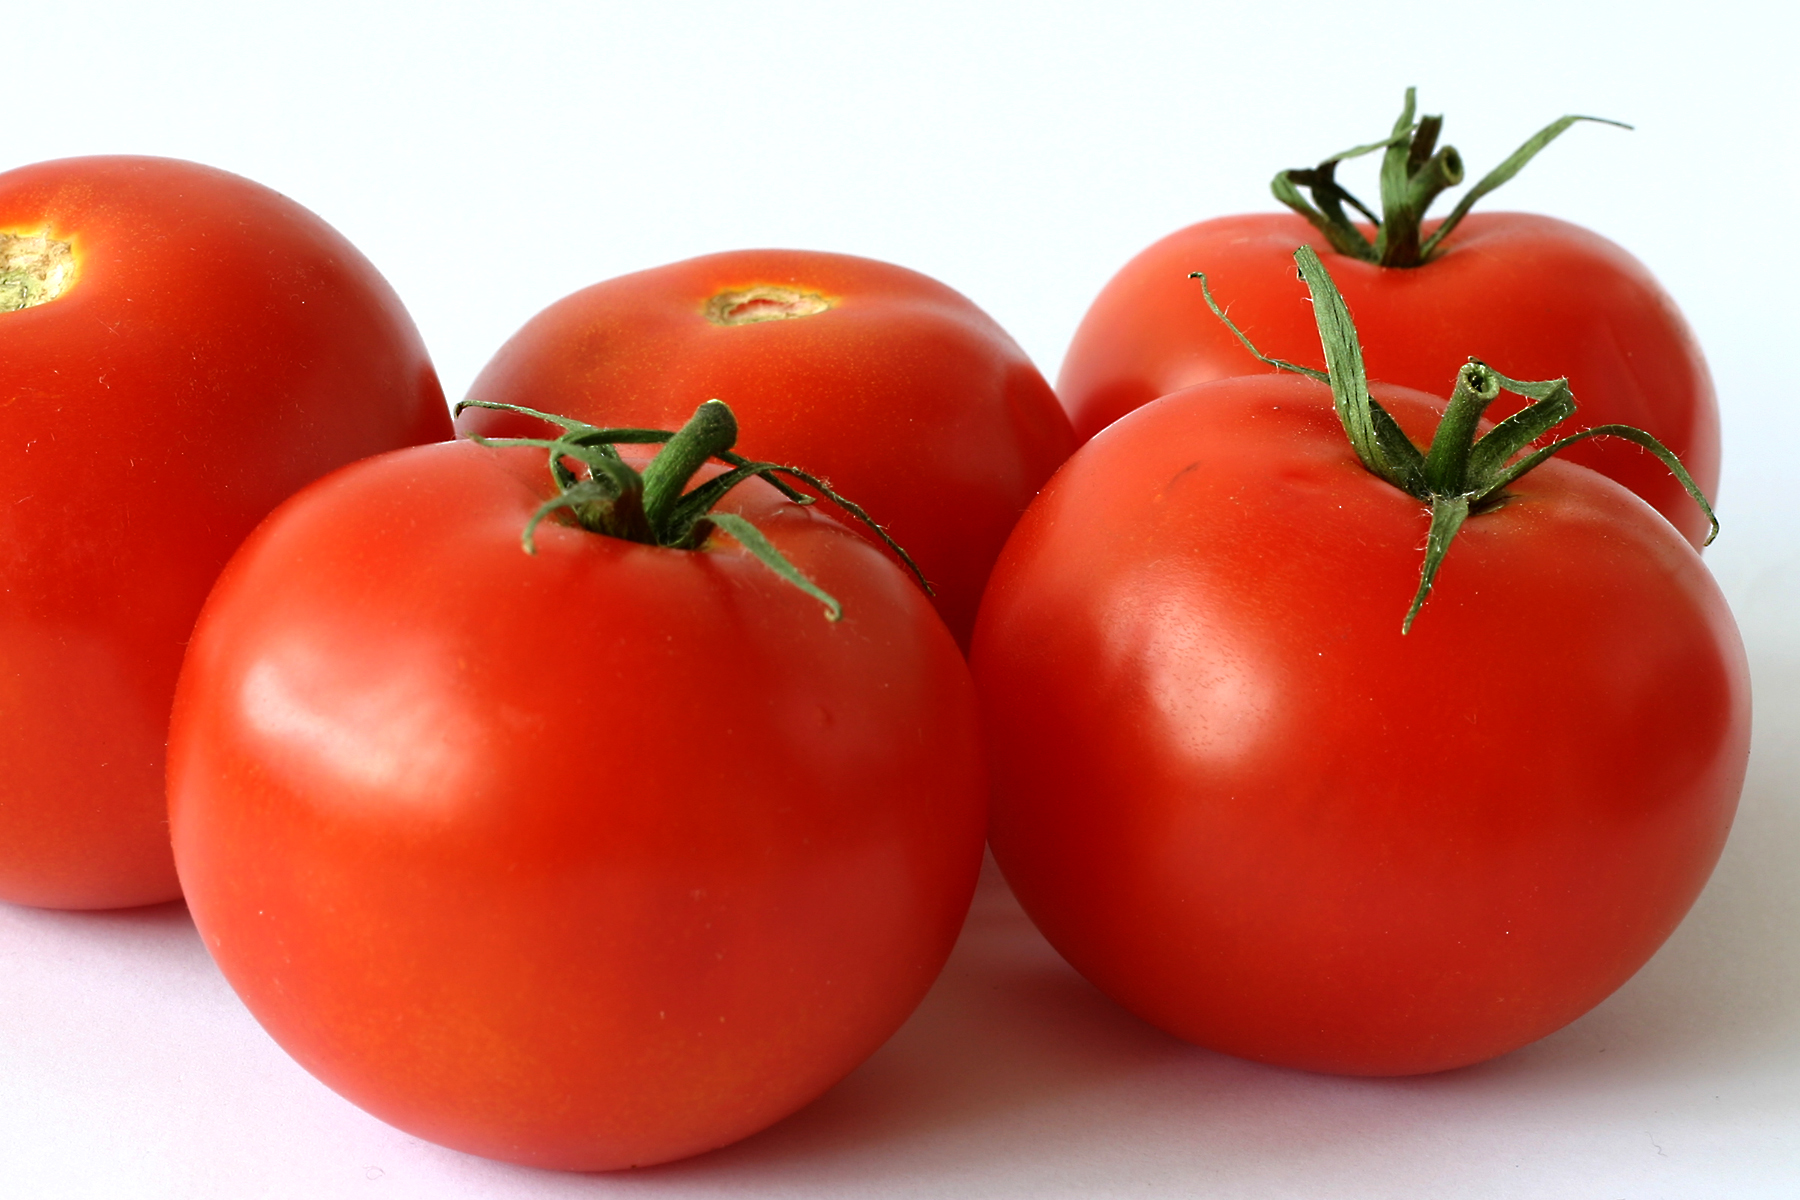 Tomatoes May Help Lower Stroke Risk